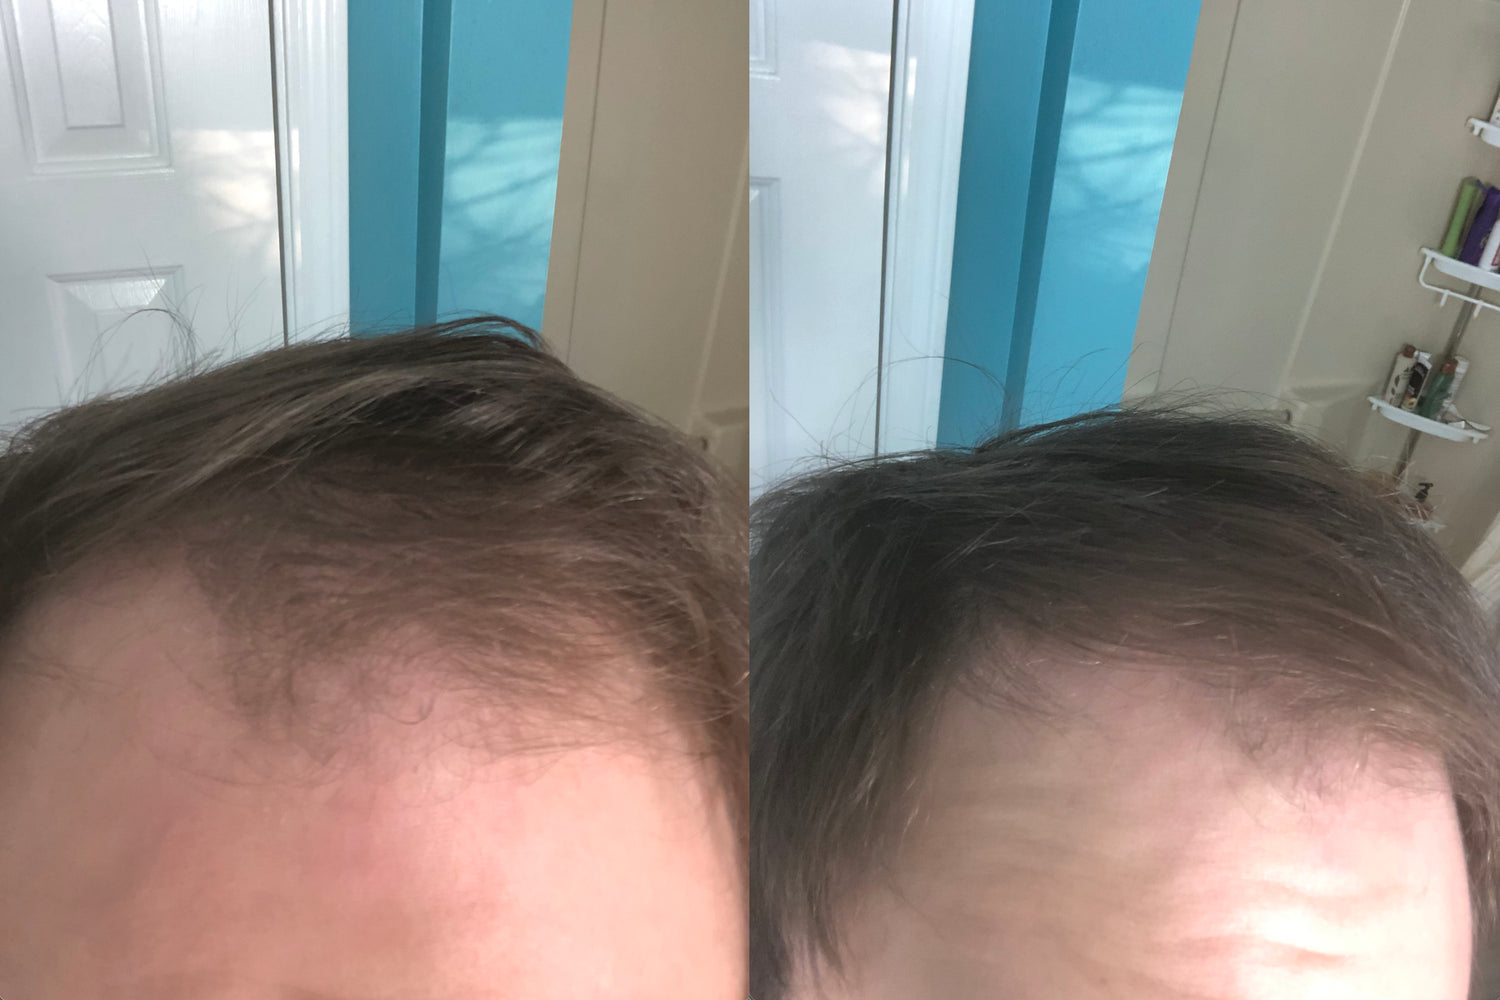 How Simfort Gave Me The Thicker Hair I’ve Been Longing For